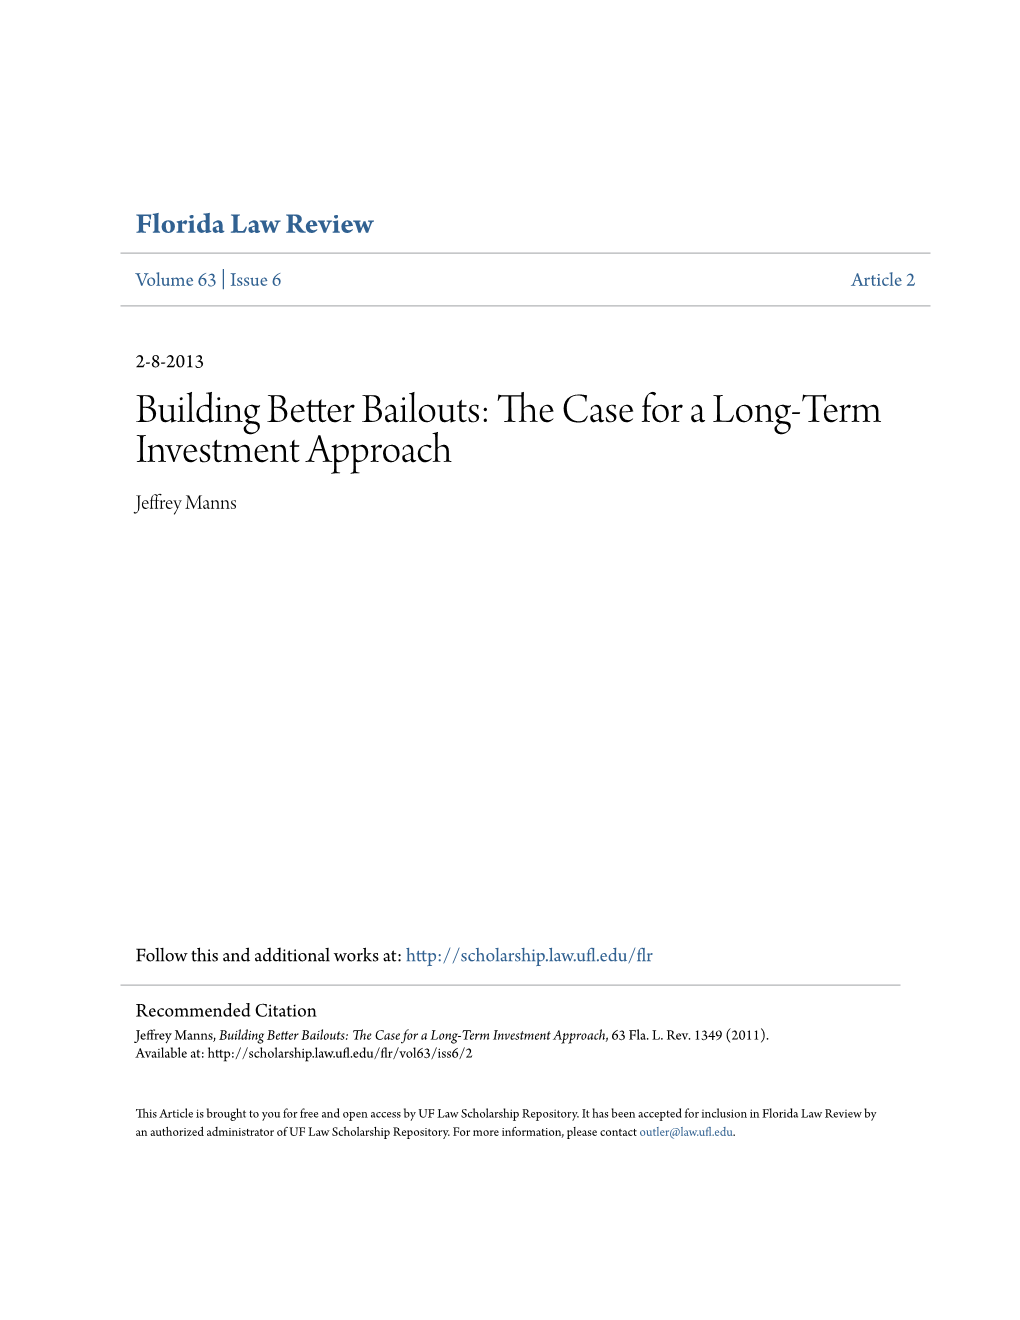 Building Better Bailouts: the Case for a Long-Term Investment Approach, 63 Fla